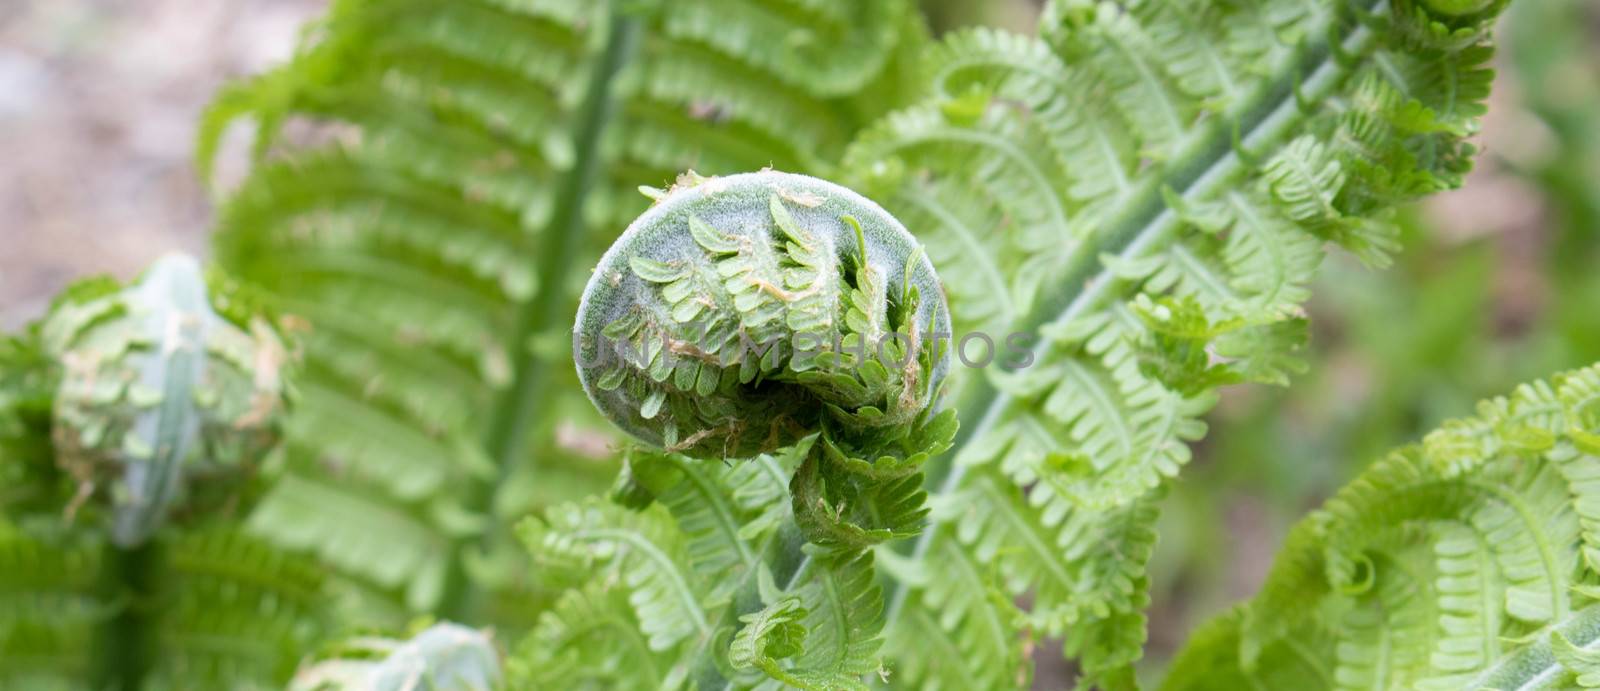 Fern Spiral of Matteuccia is a genus of ferns with one species: Matteuccia struthiopteris common names ostrich fern, fiddlehead fern, or shuttlecock fern by lapushka62